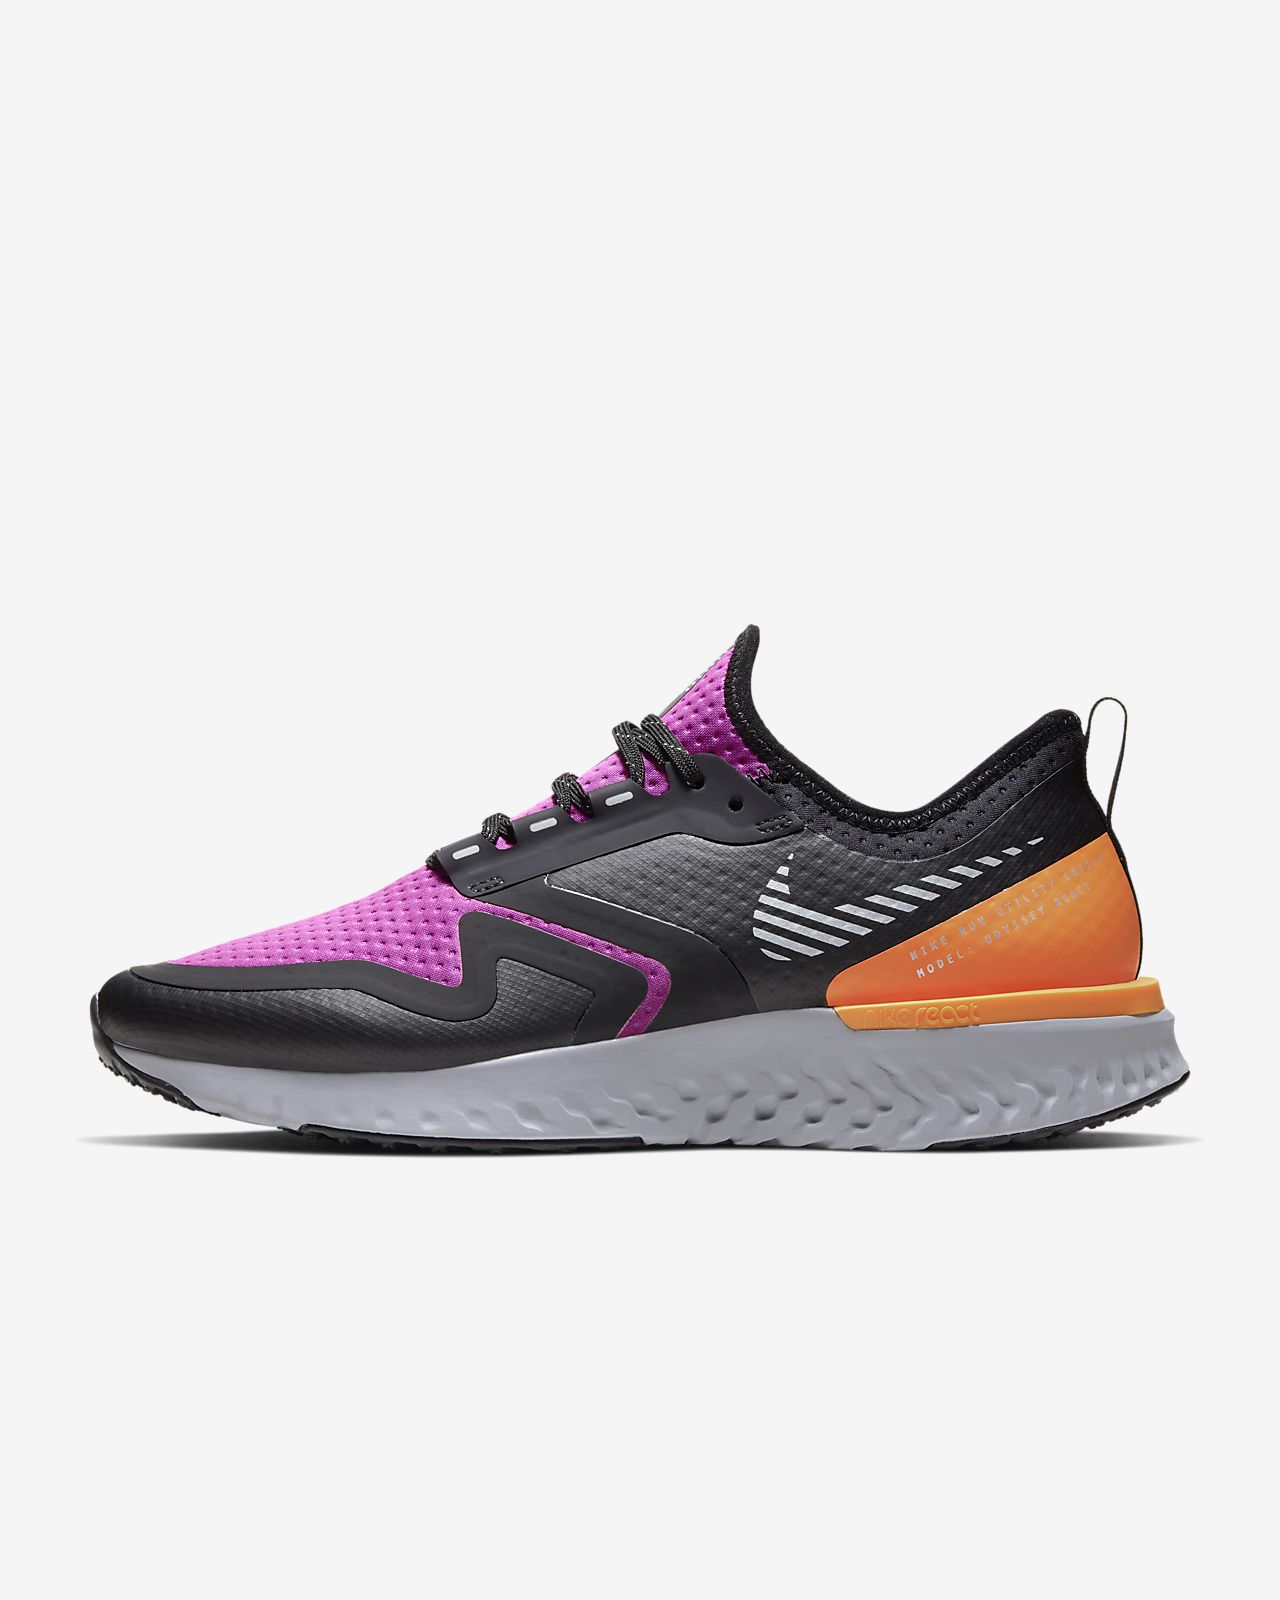 odyssey react shield buy clothes shoes 